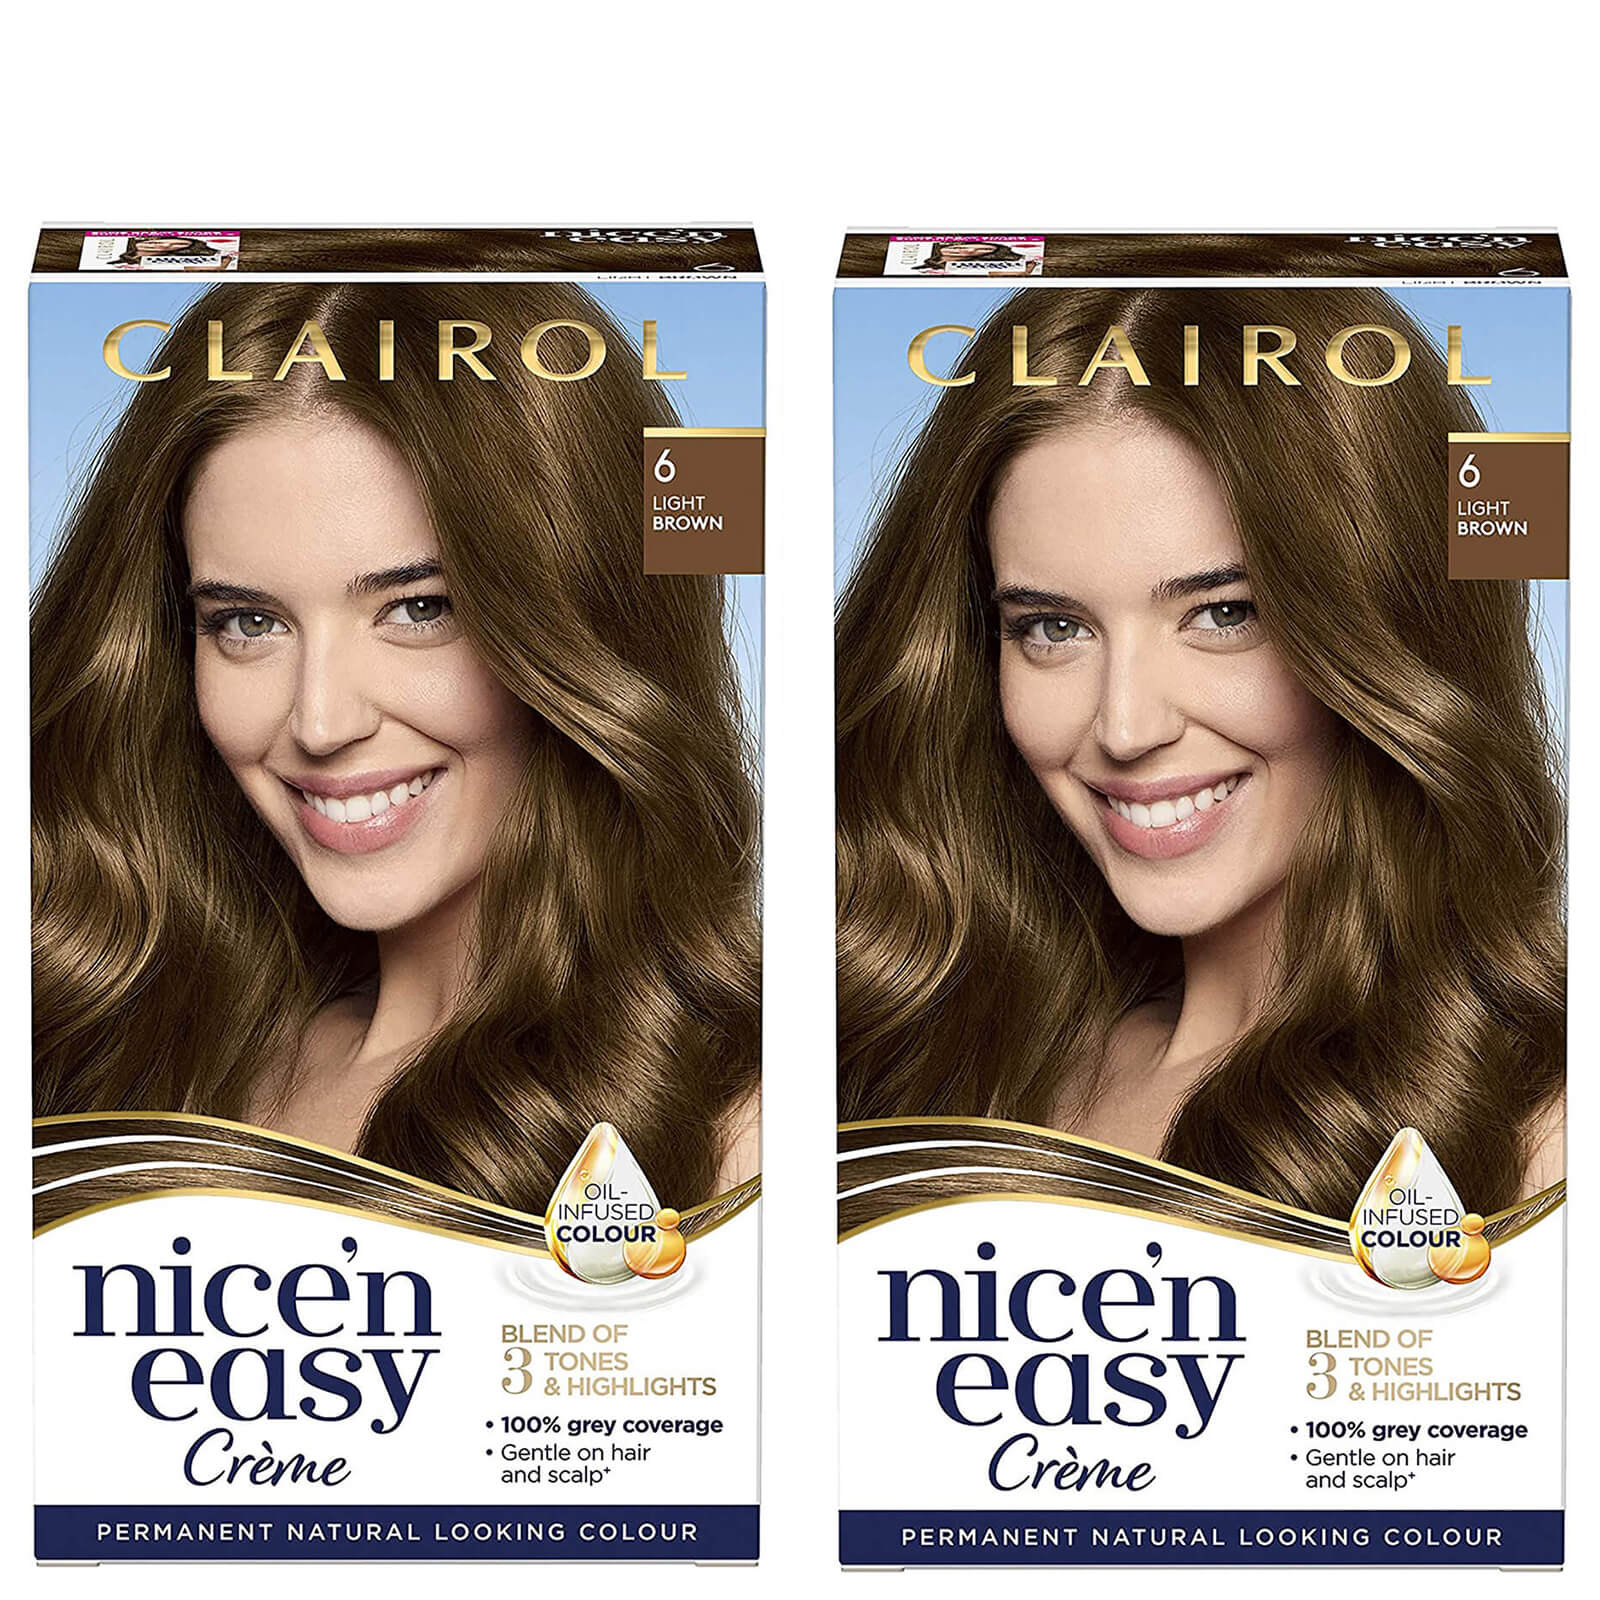 Clairol Nice' n Easy Crème Natural Looking Oil Infused Permanent Hair Dye Duo (Various Shades) - 6 Light Brown